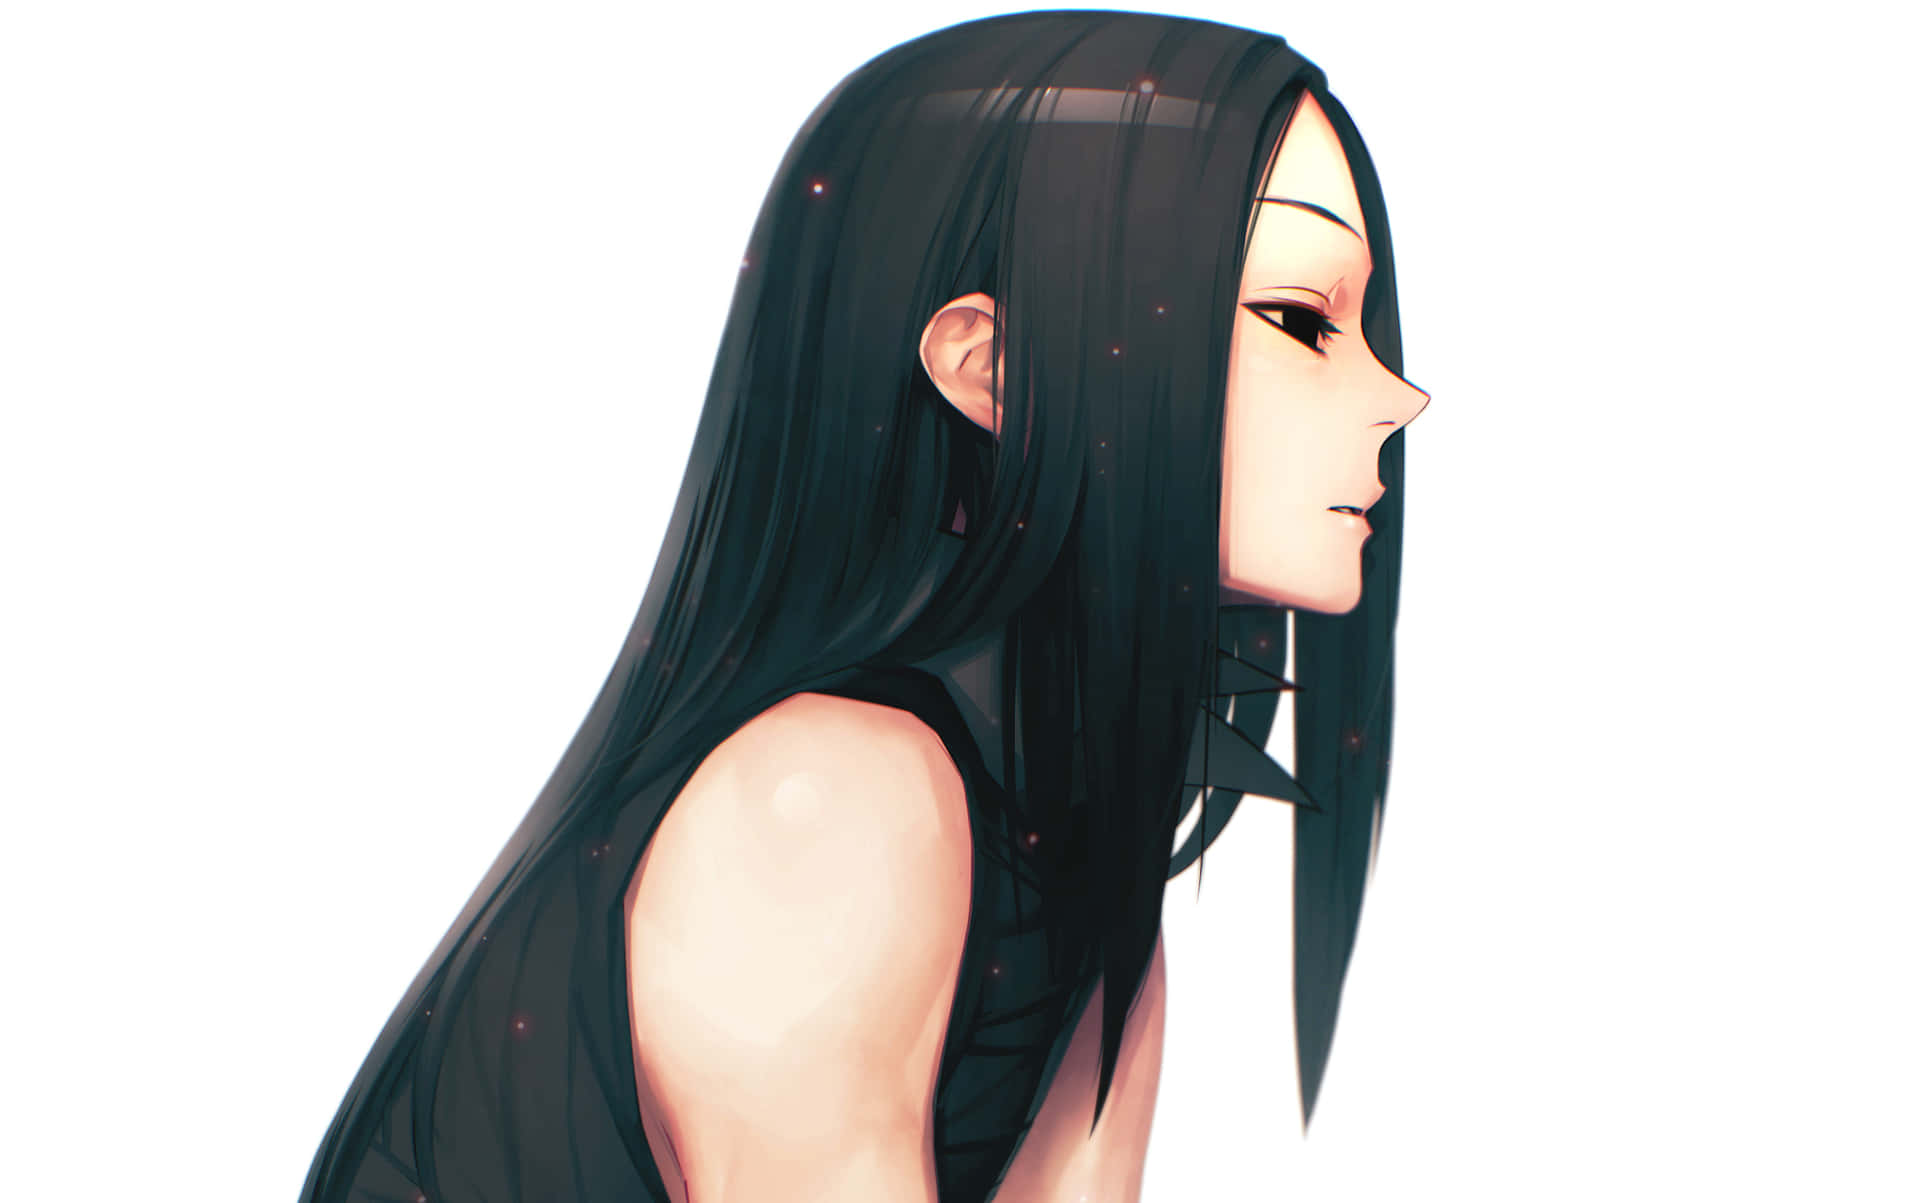 Meet the Young Master of the Zoldyck Family – Illumi Zoldyck. Wallpaper